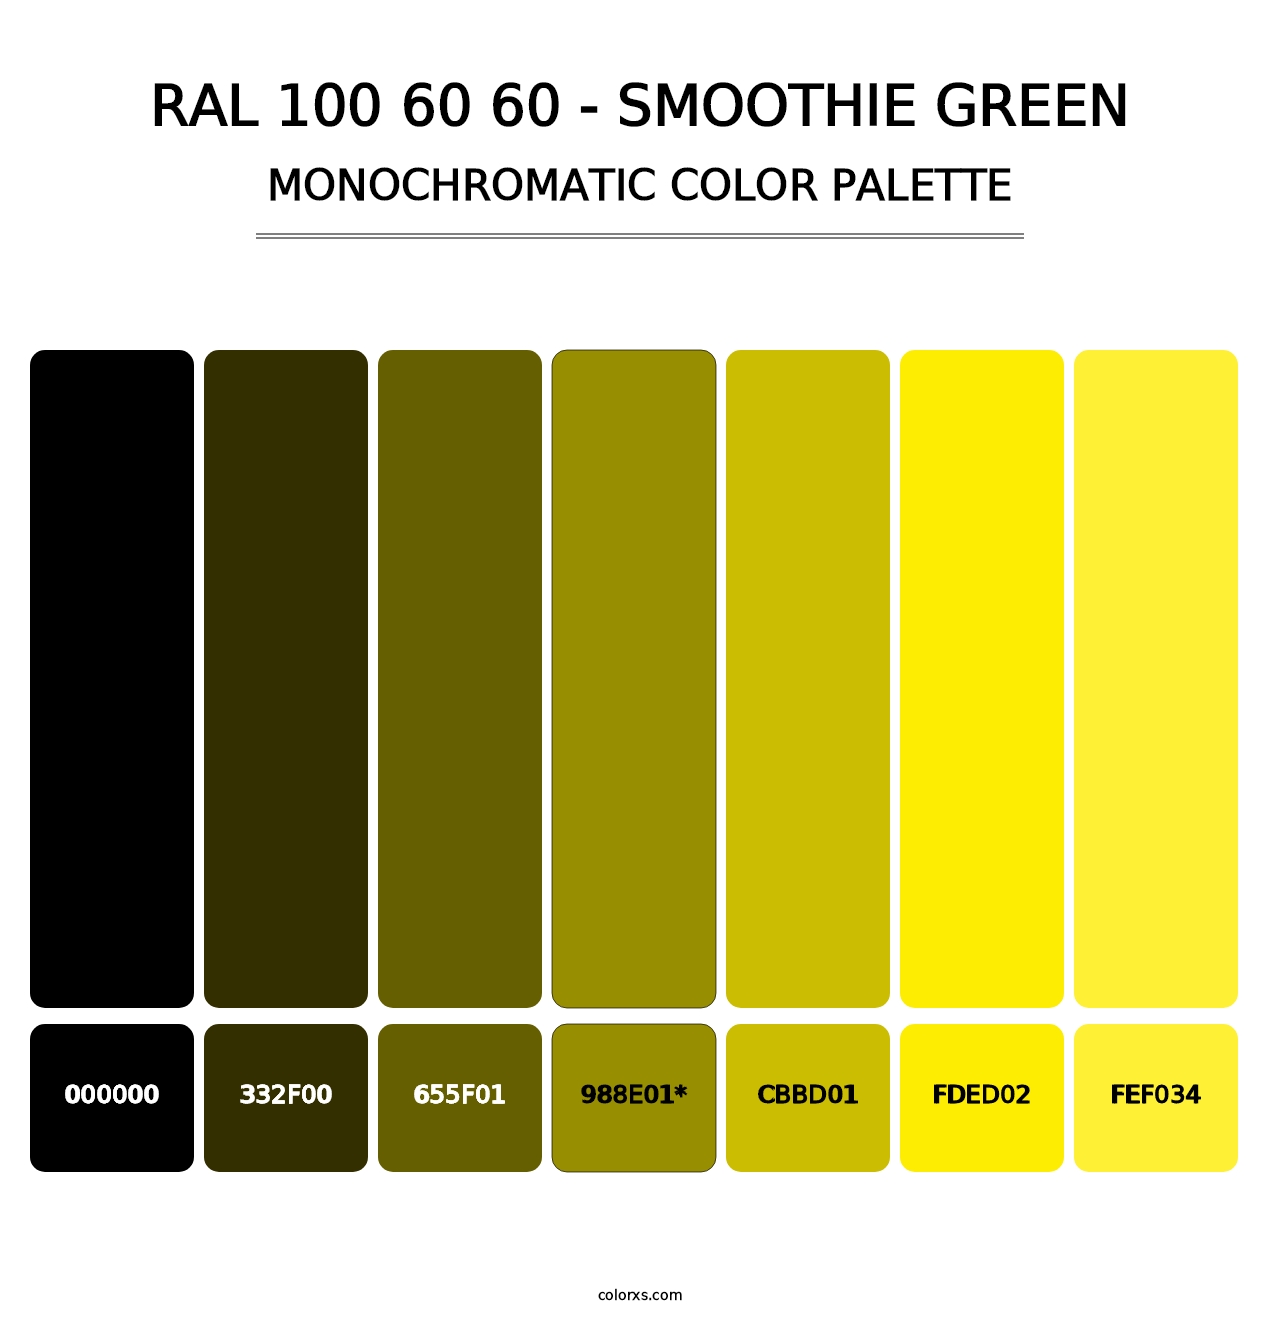 RAL 100 60 60 - Smoothie Green - Monochromatic Color Palette